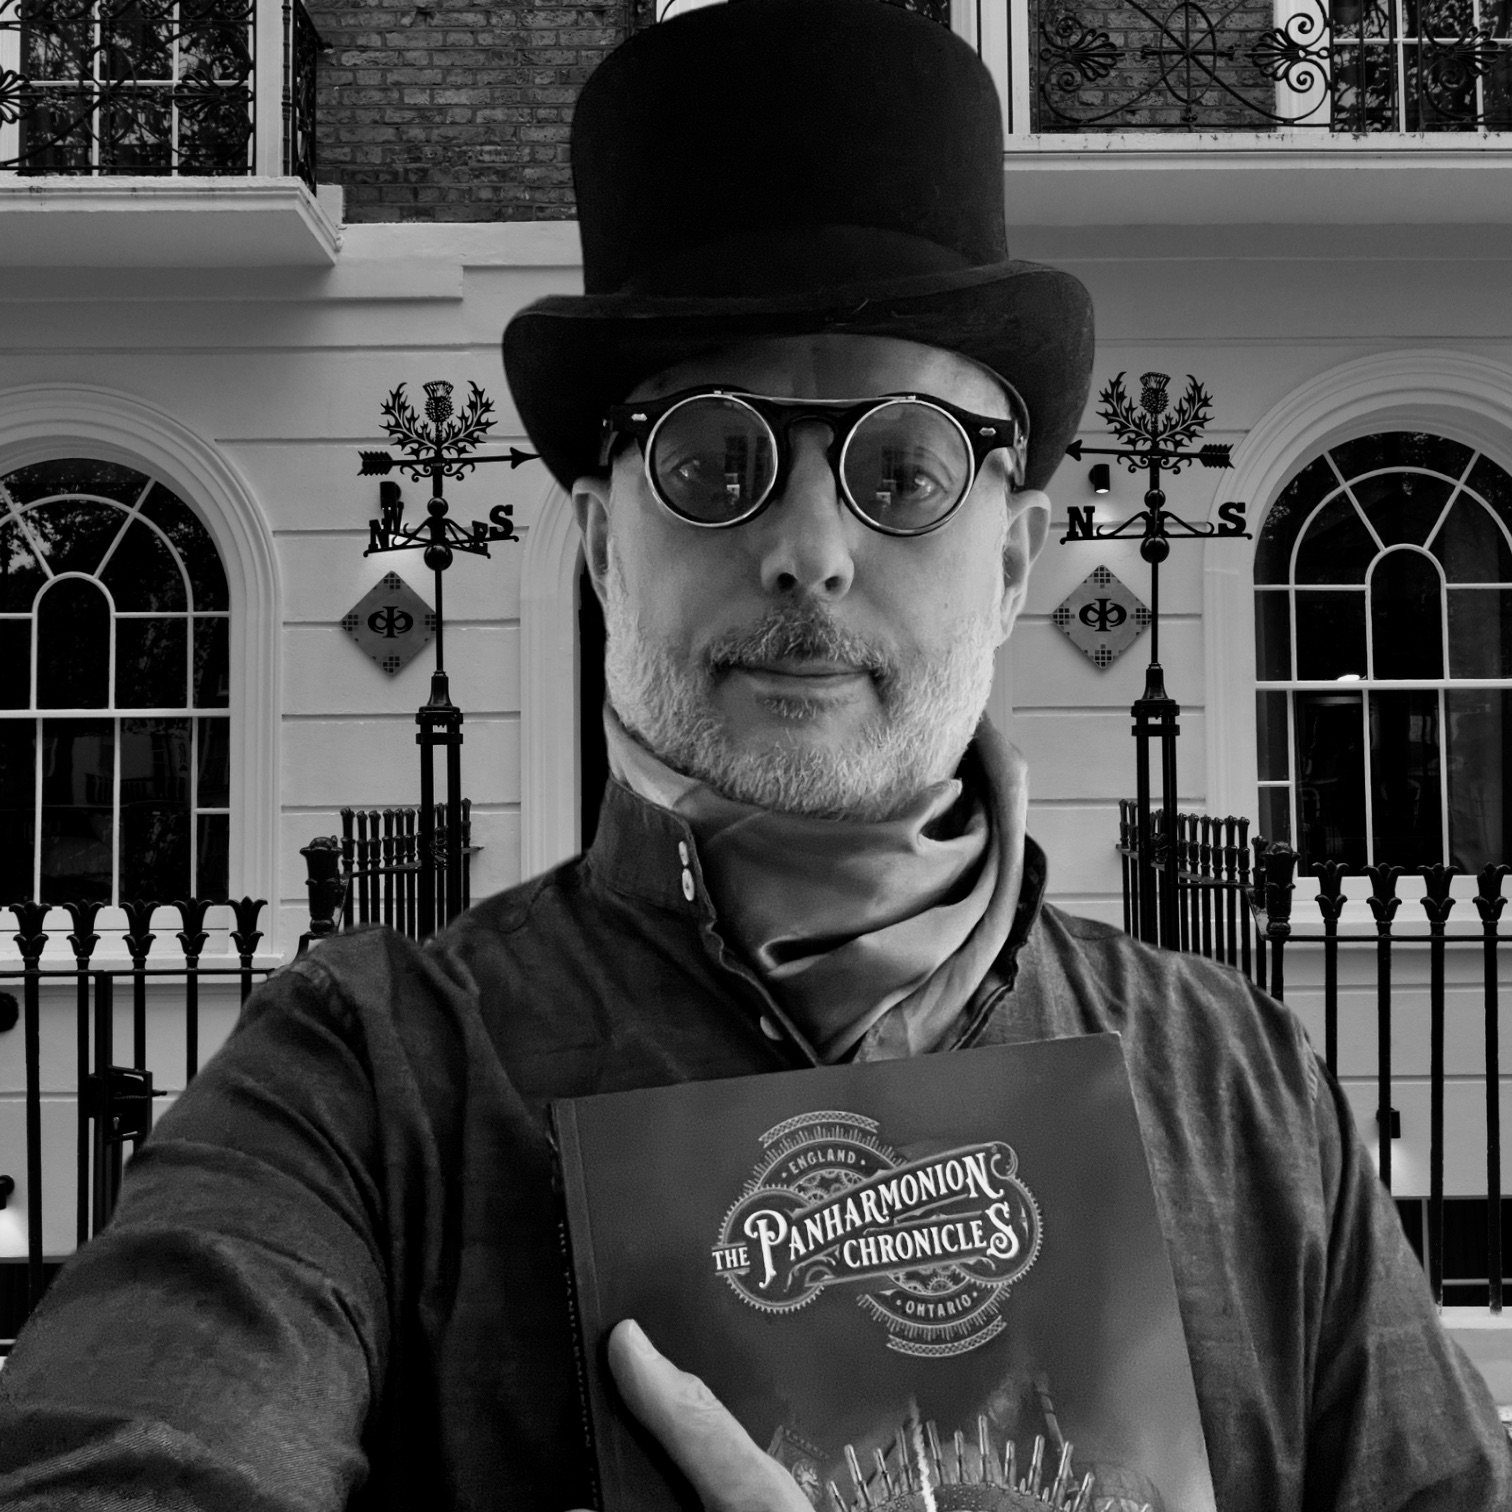 “THE PANHARMONION CHRONICLES: Times of London” (EXCLUSIVE) Interview with Henry Chebaane